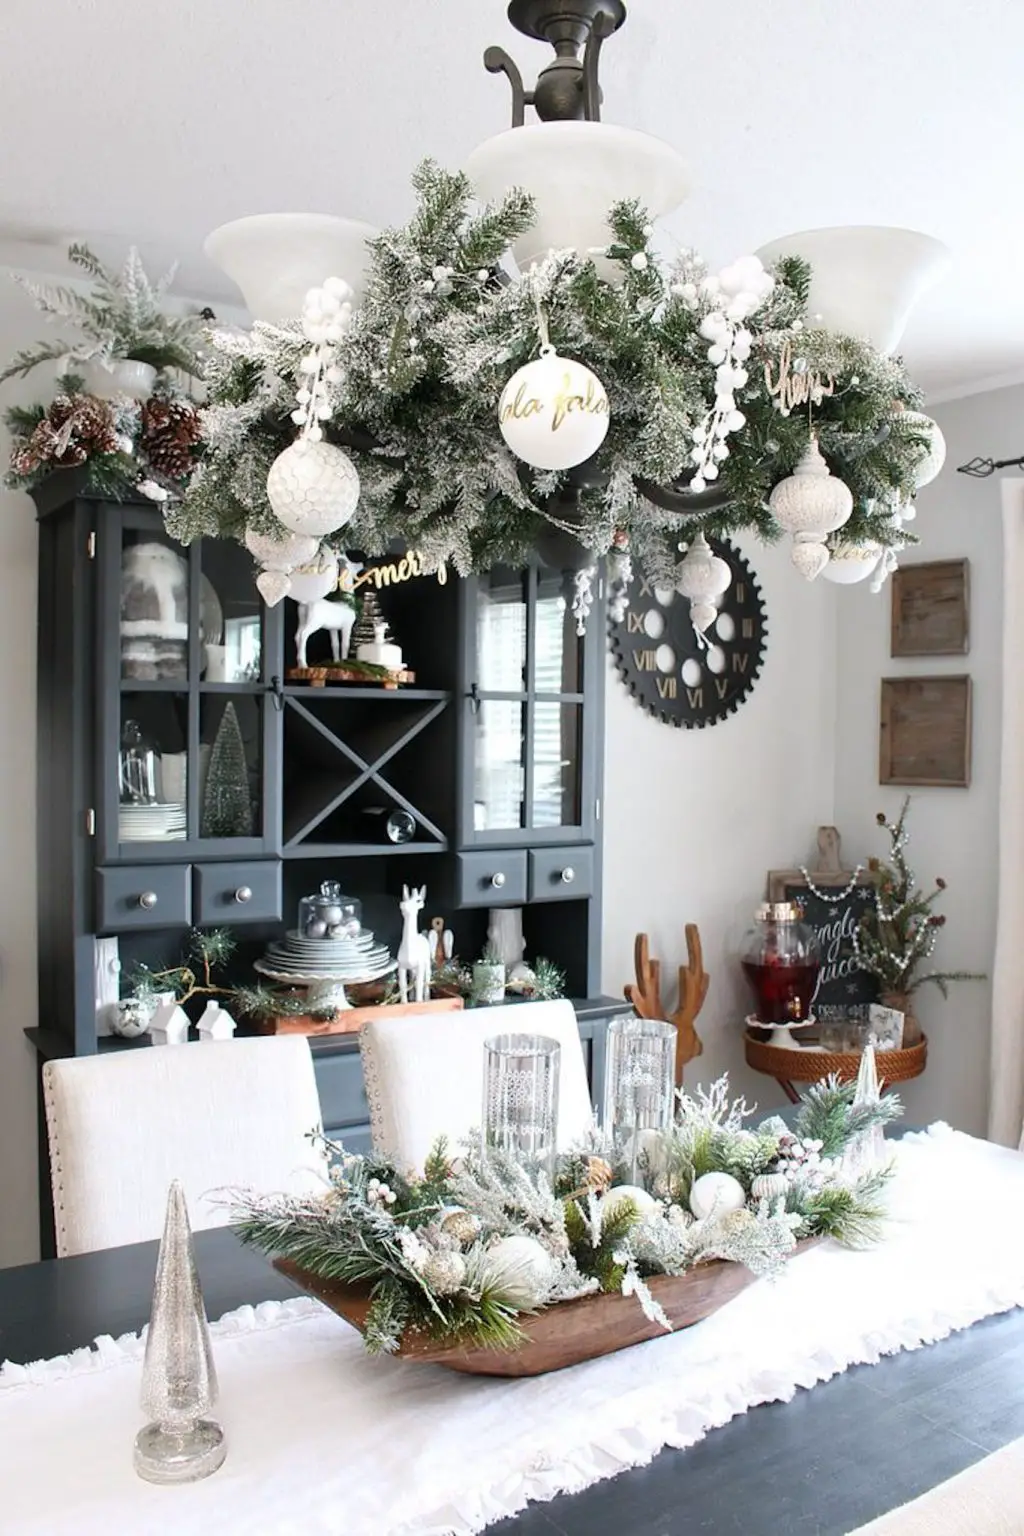 Christmas Decor Ideas for our Home - Blogs by Aria